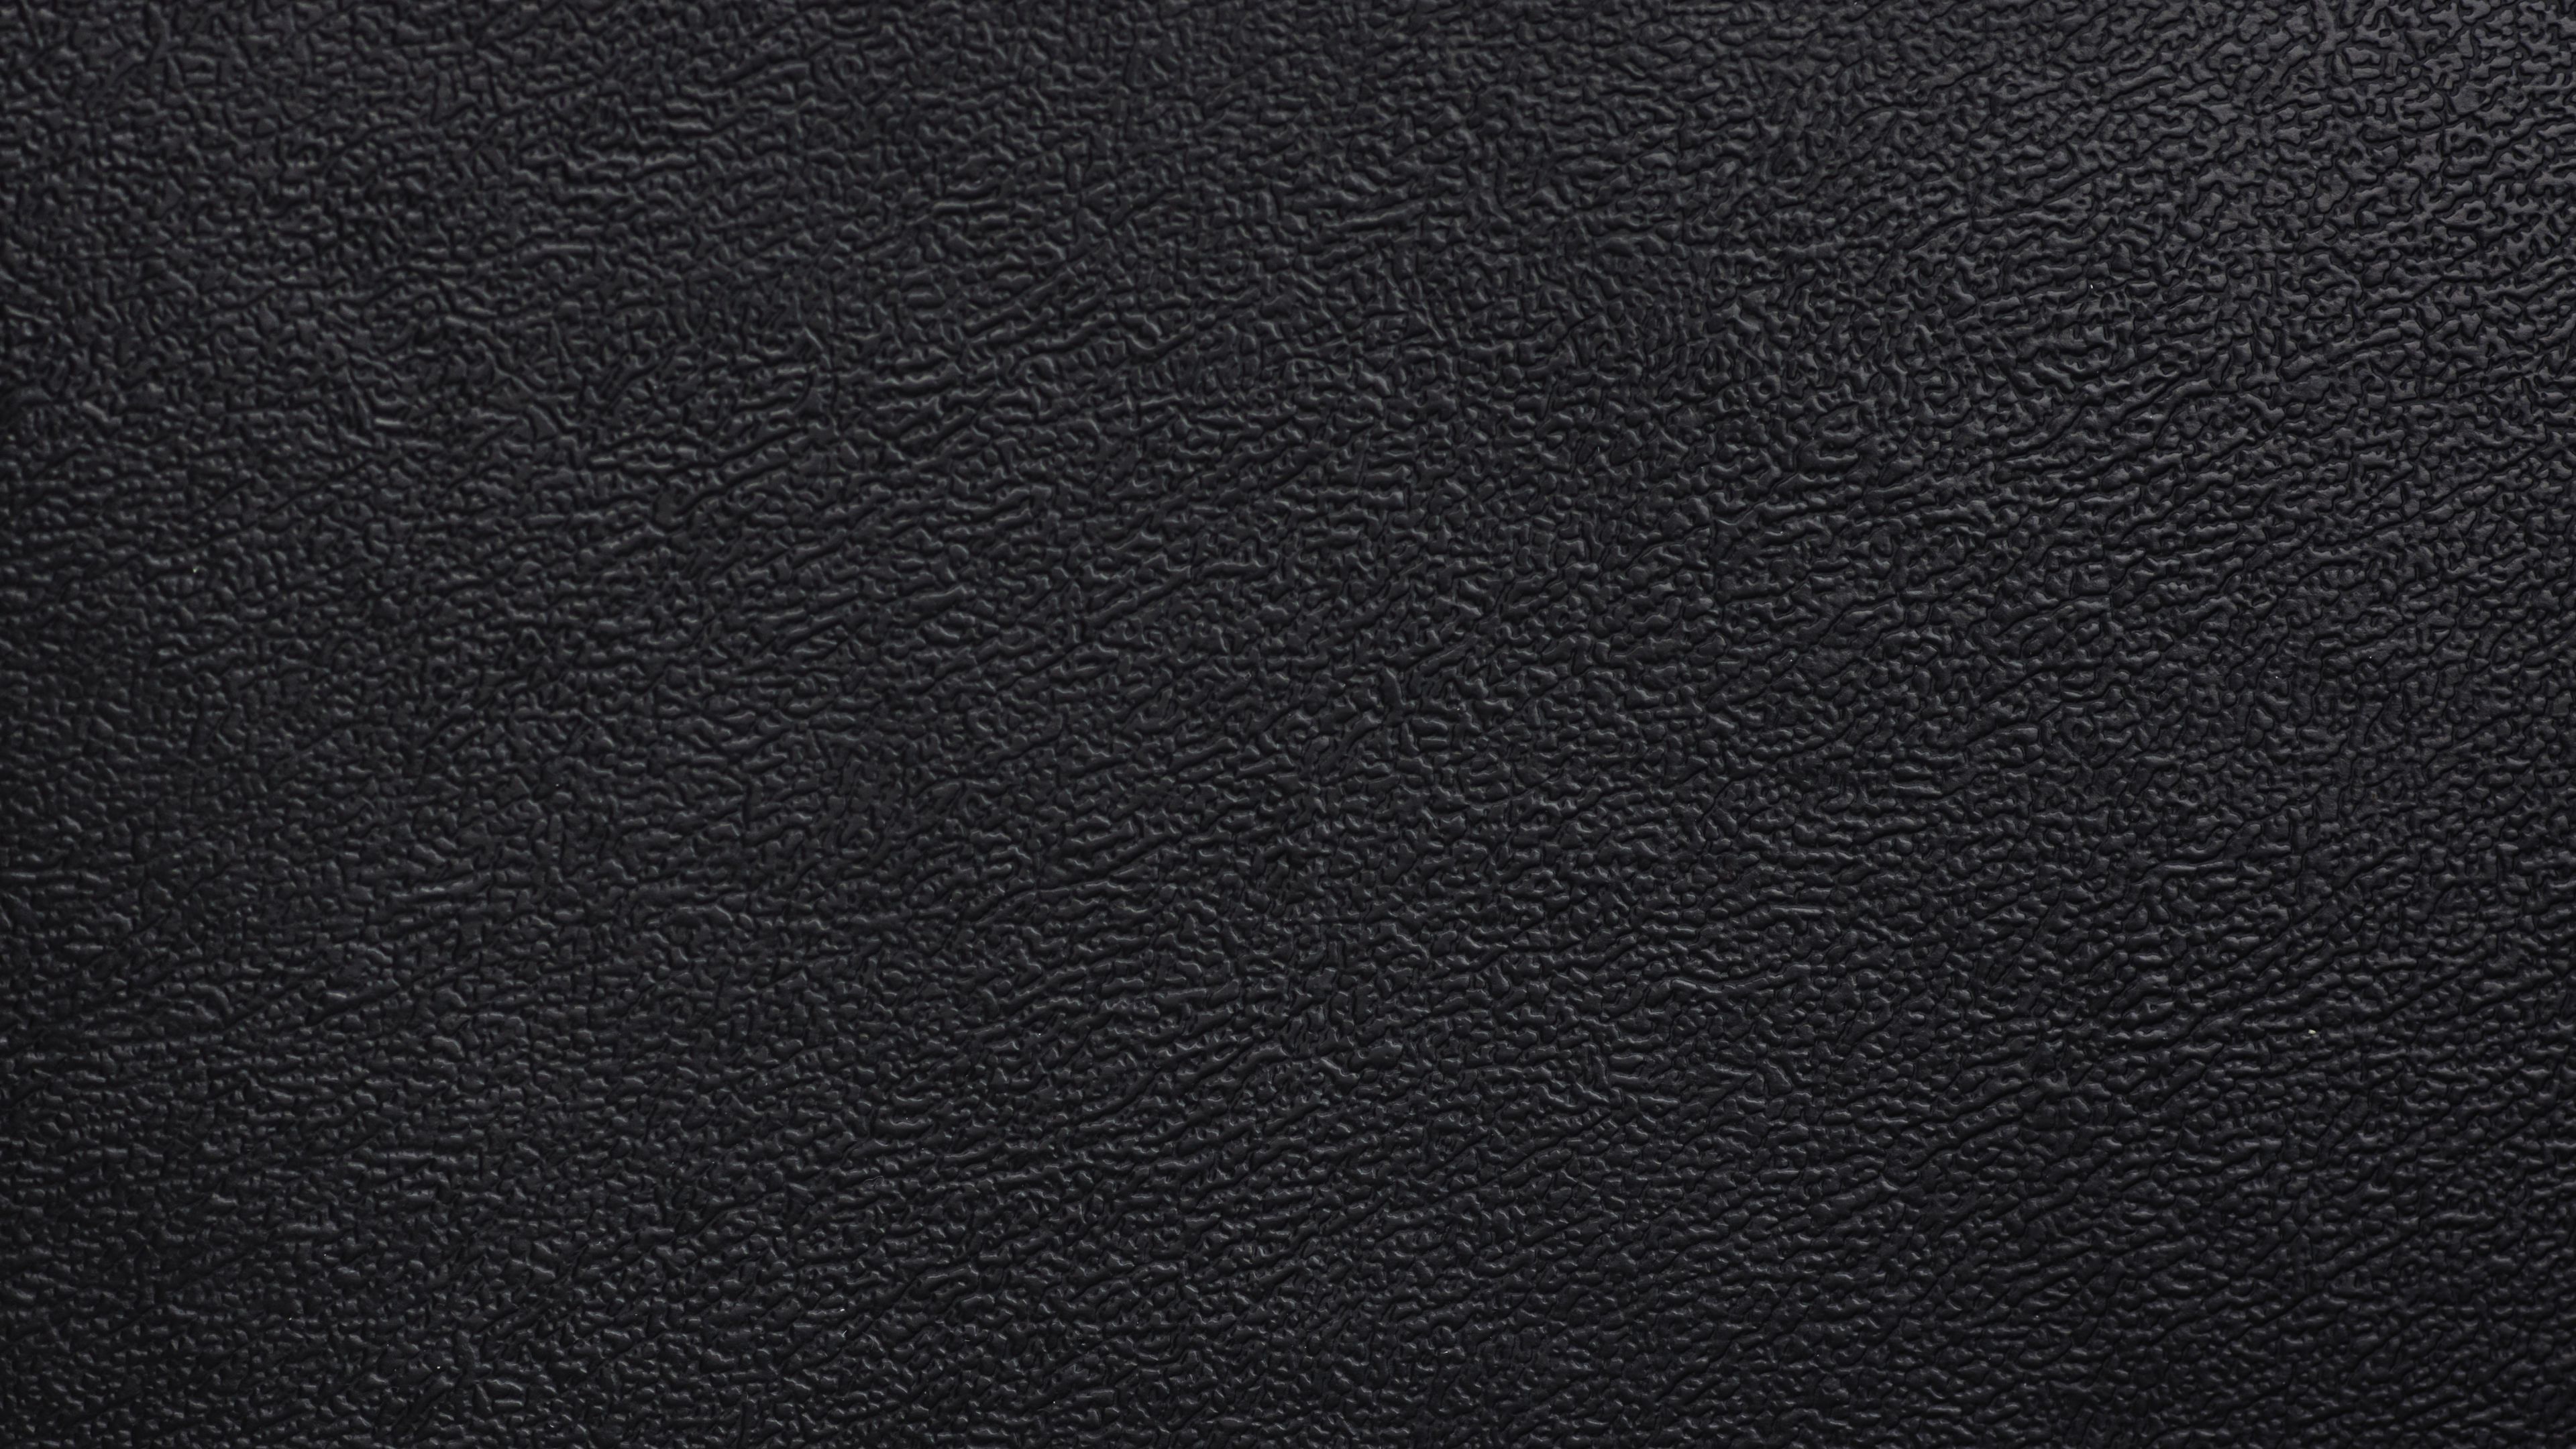 HD Wallpaper for theme: leather HD wallpaper, background